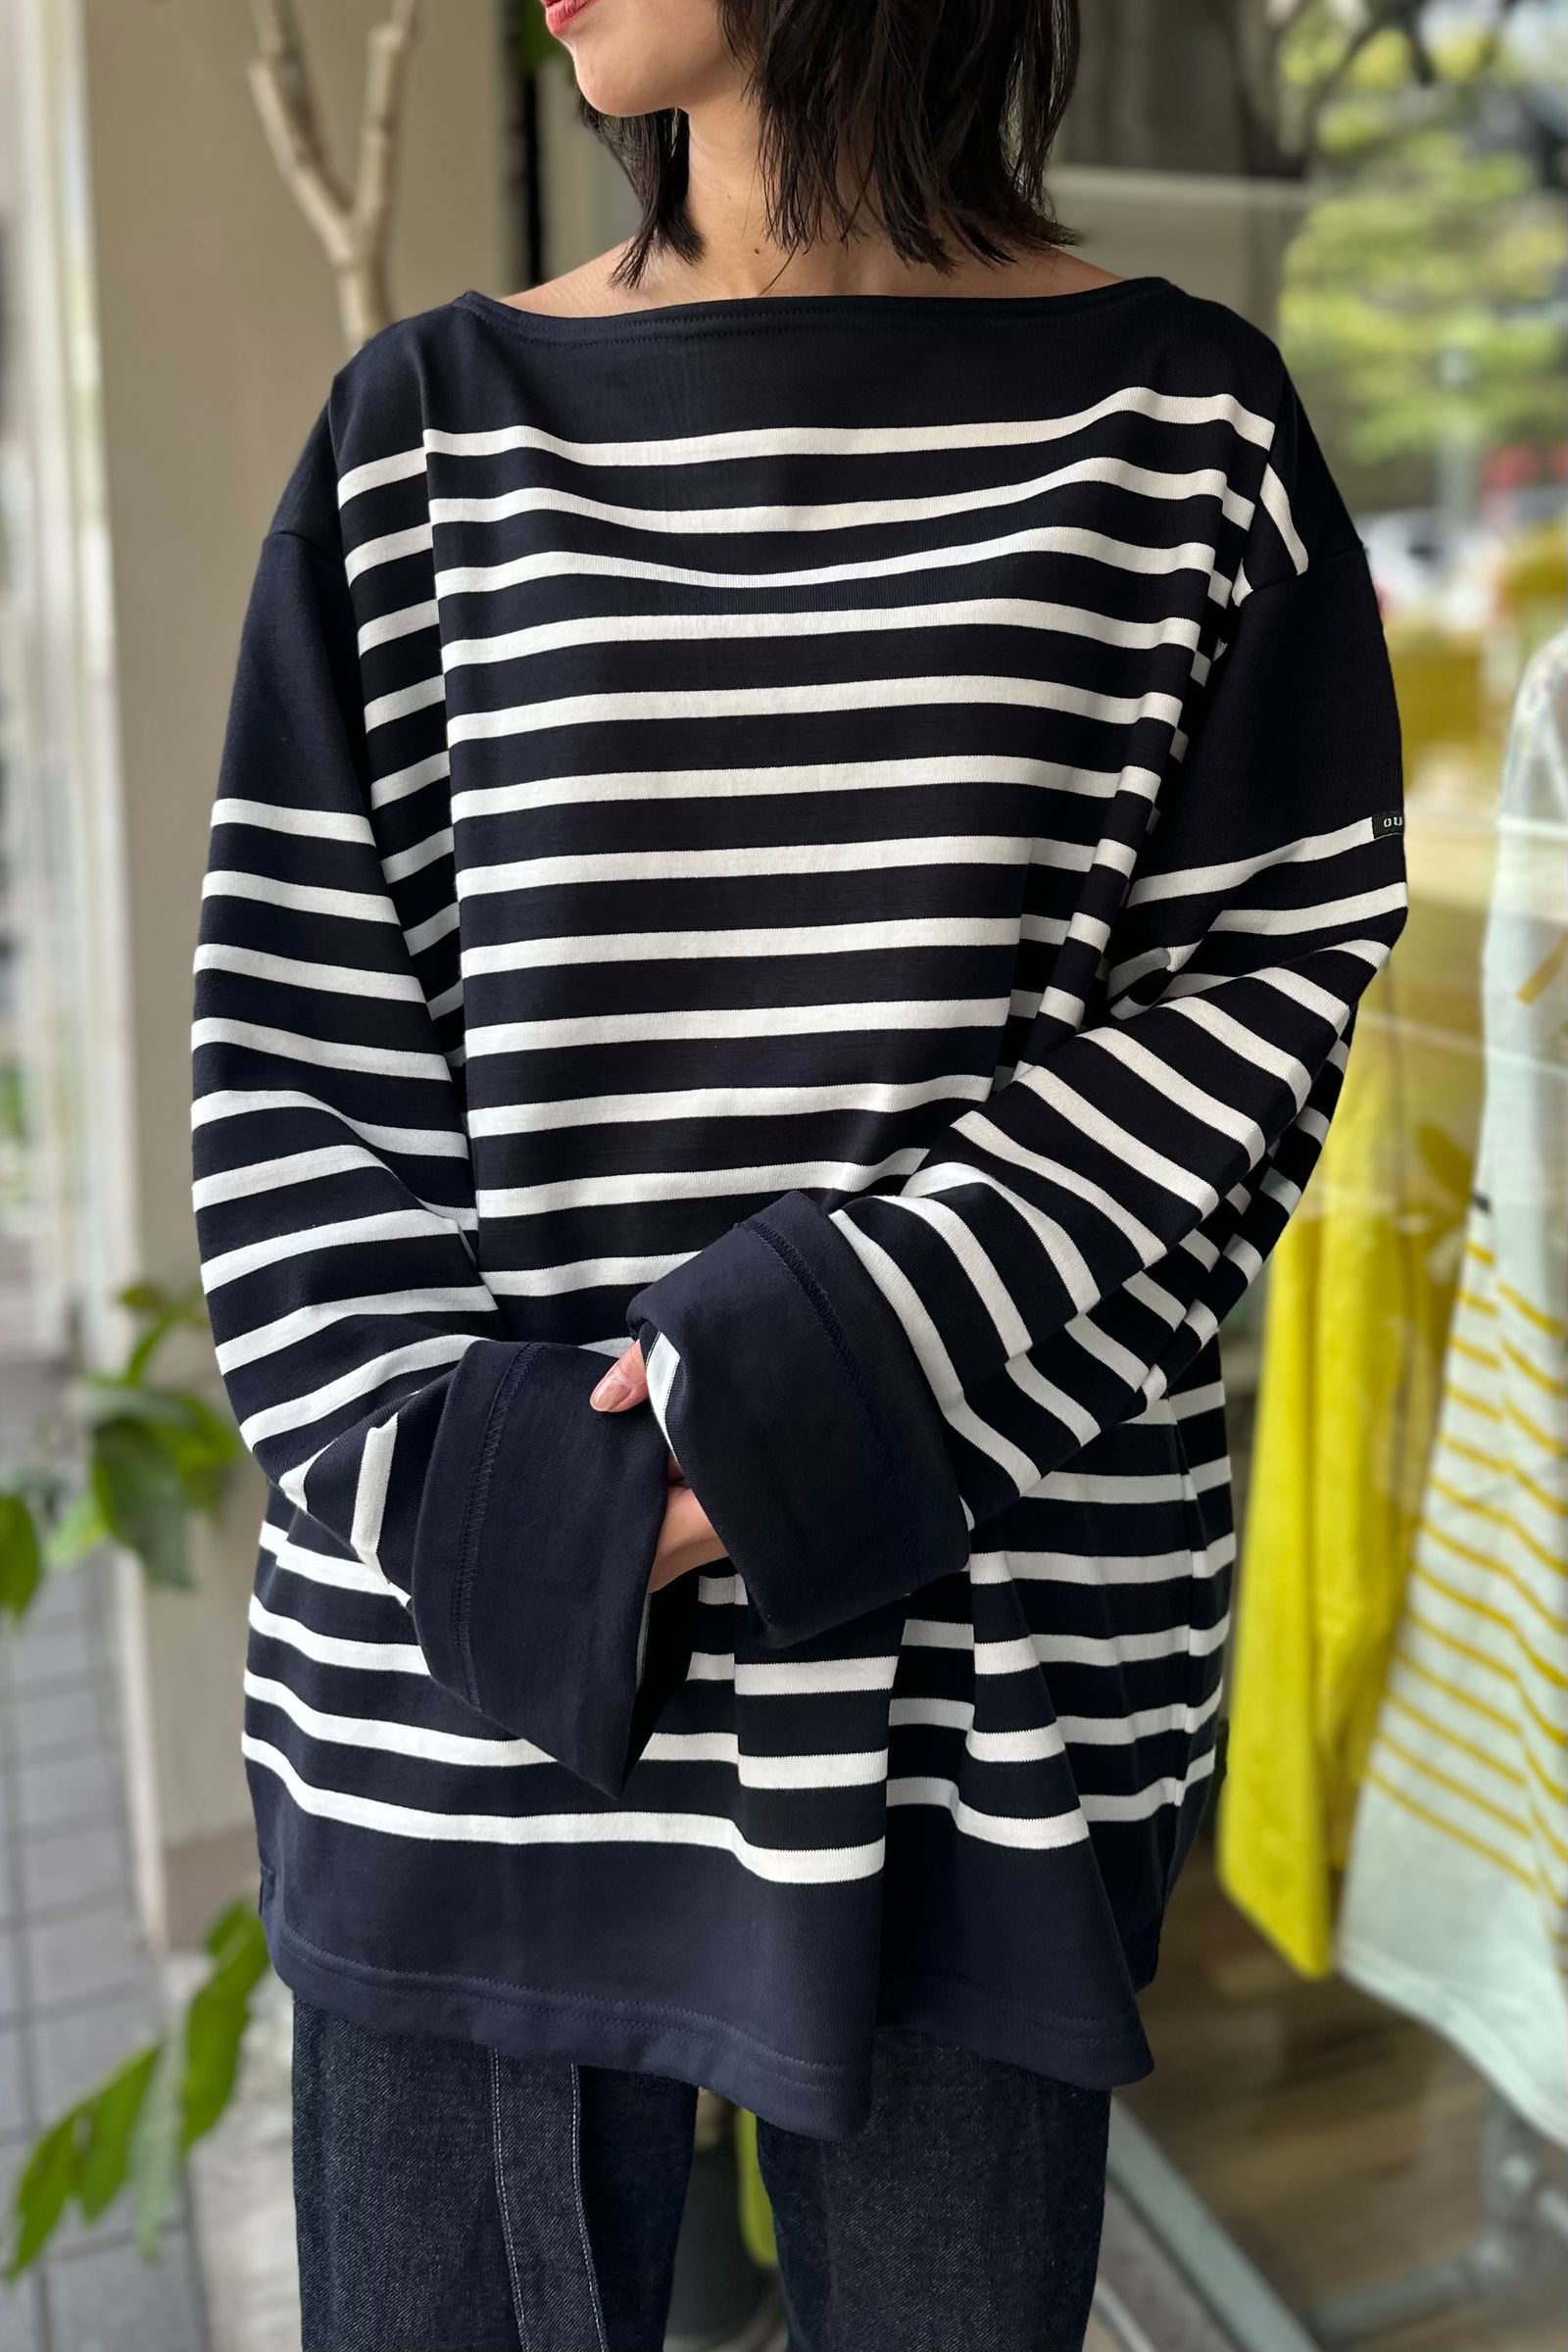 OUTIL - バスクシャツ/tricot aast -gibraltar sea/off- 23aw unisex | asterisk